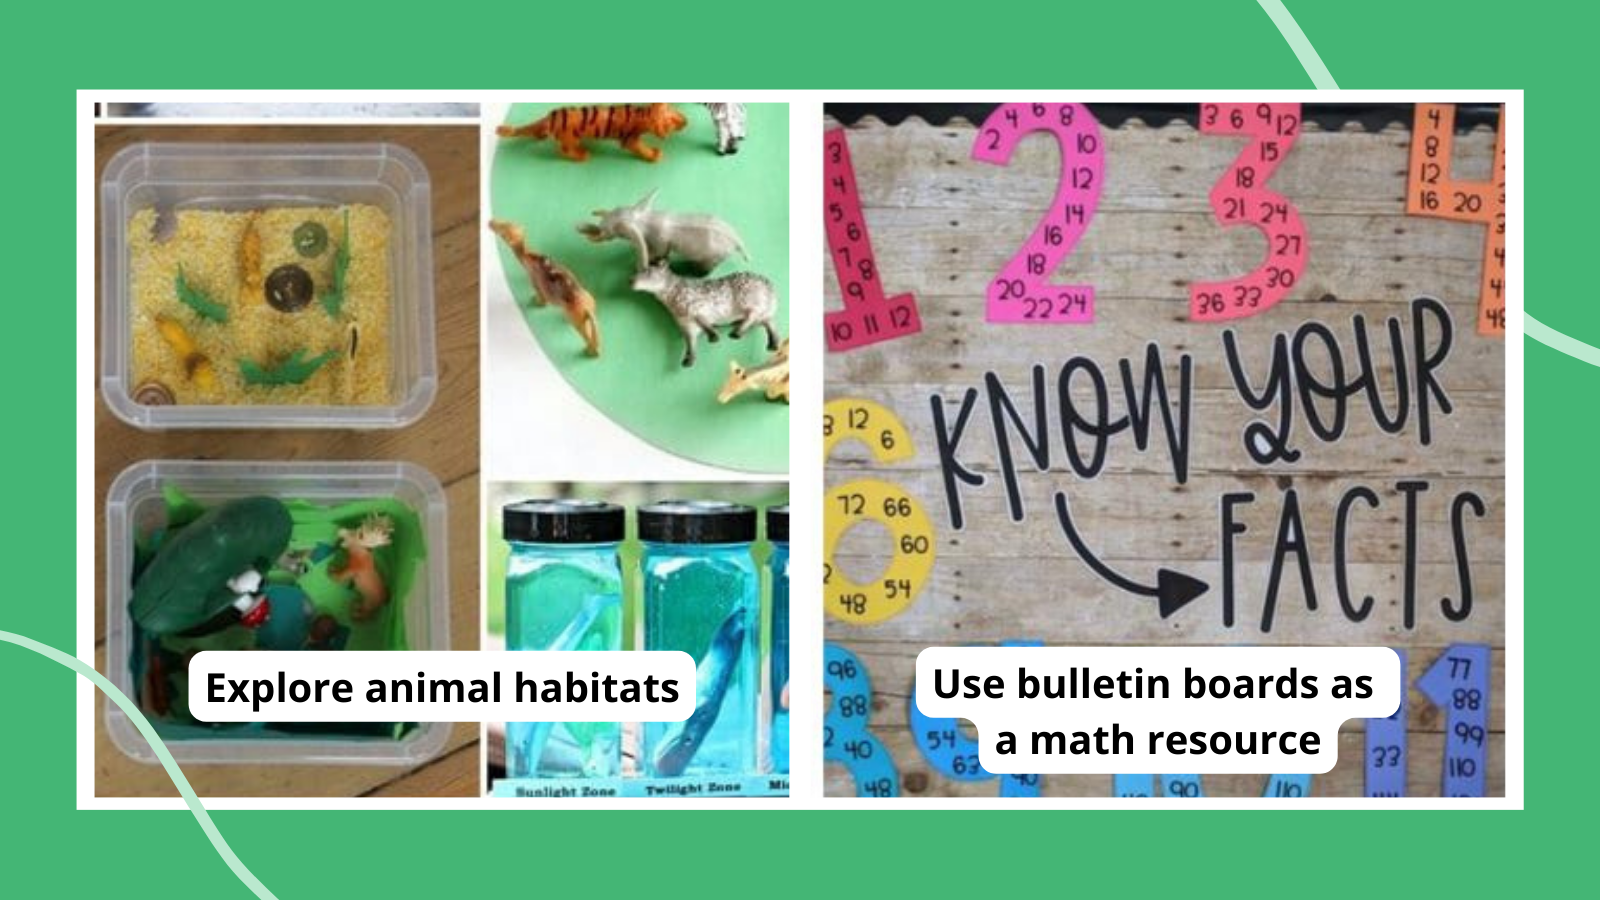 Tips for teaching fifth grade including exploring animal habitats and using bulletin boards as a math resource.